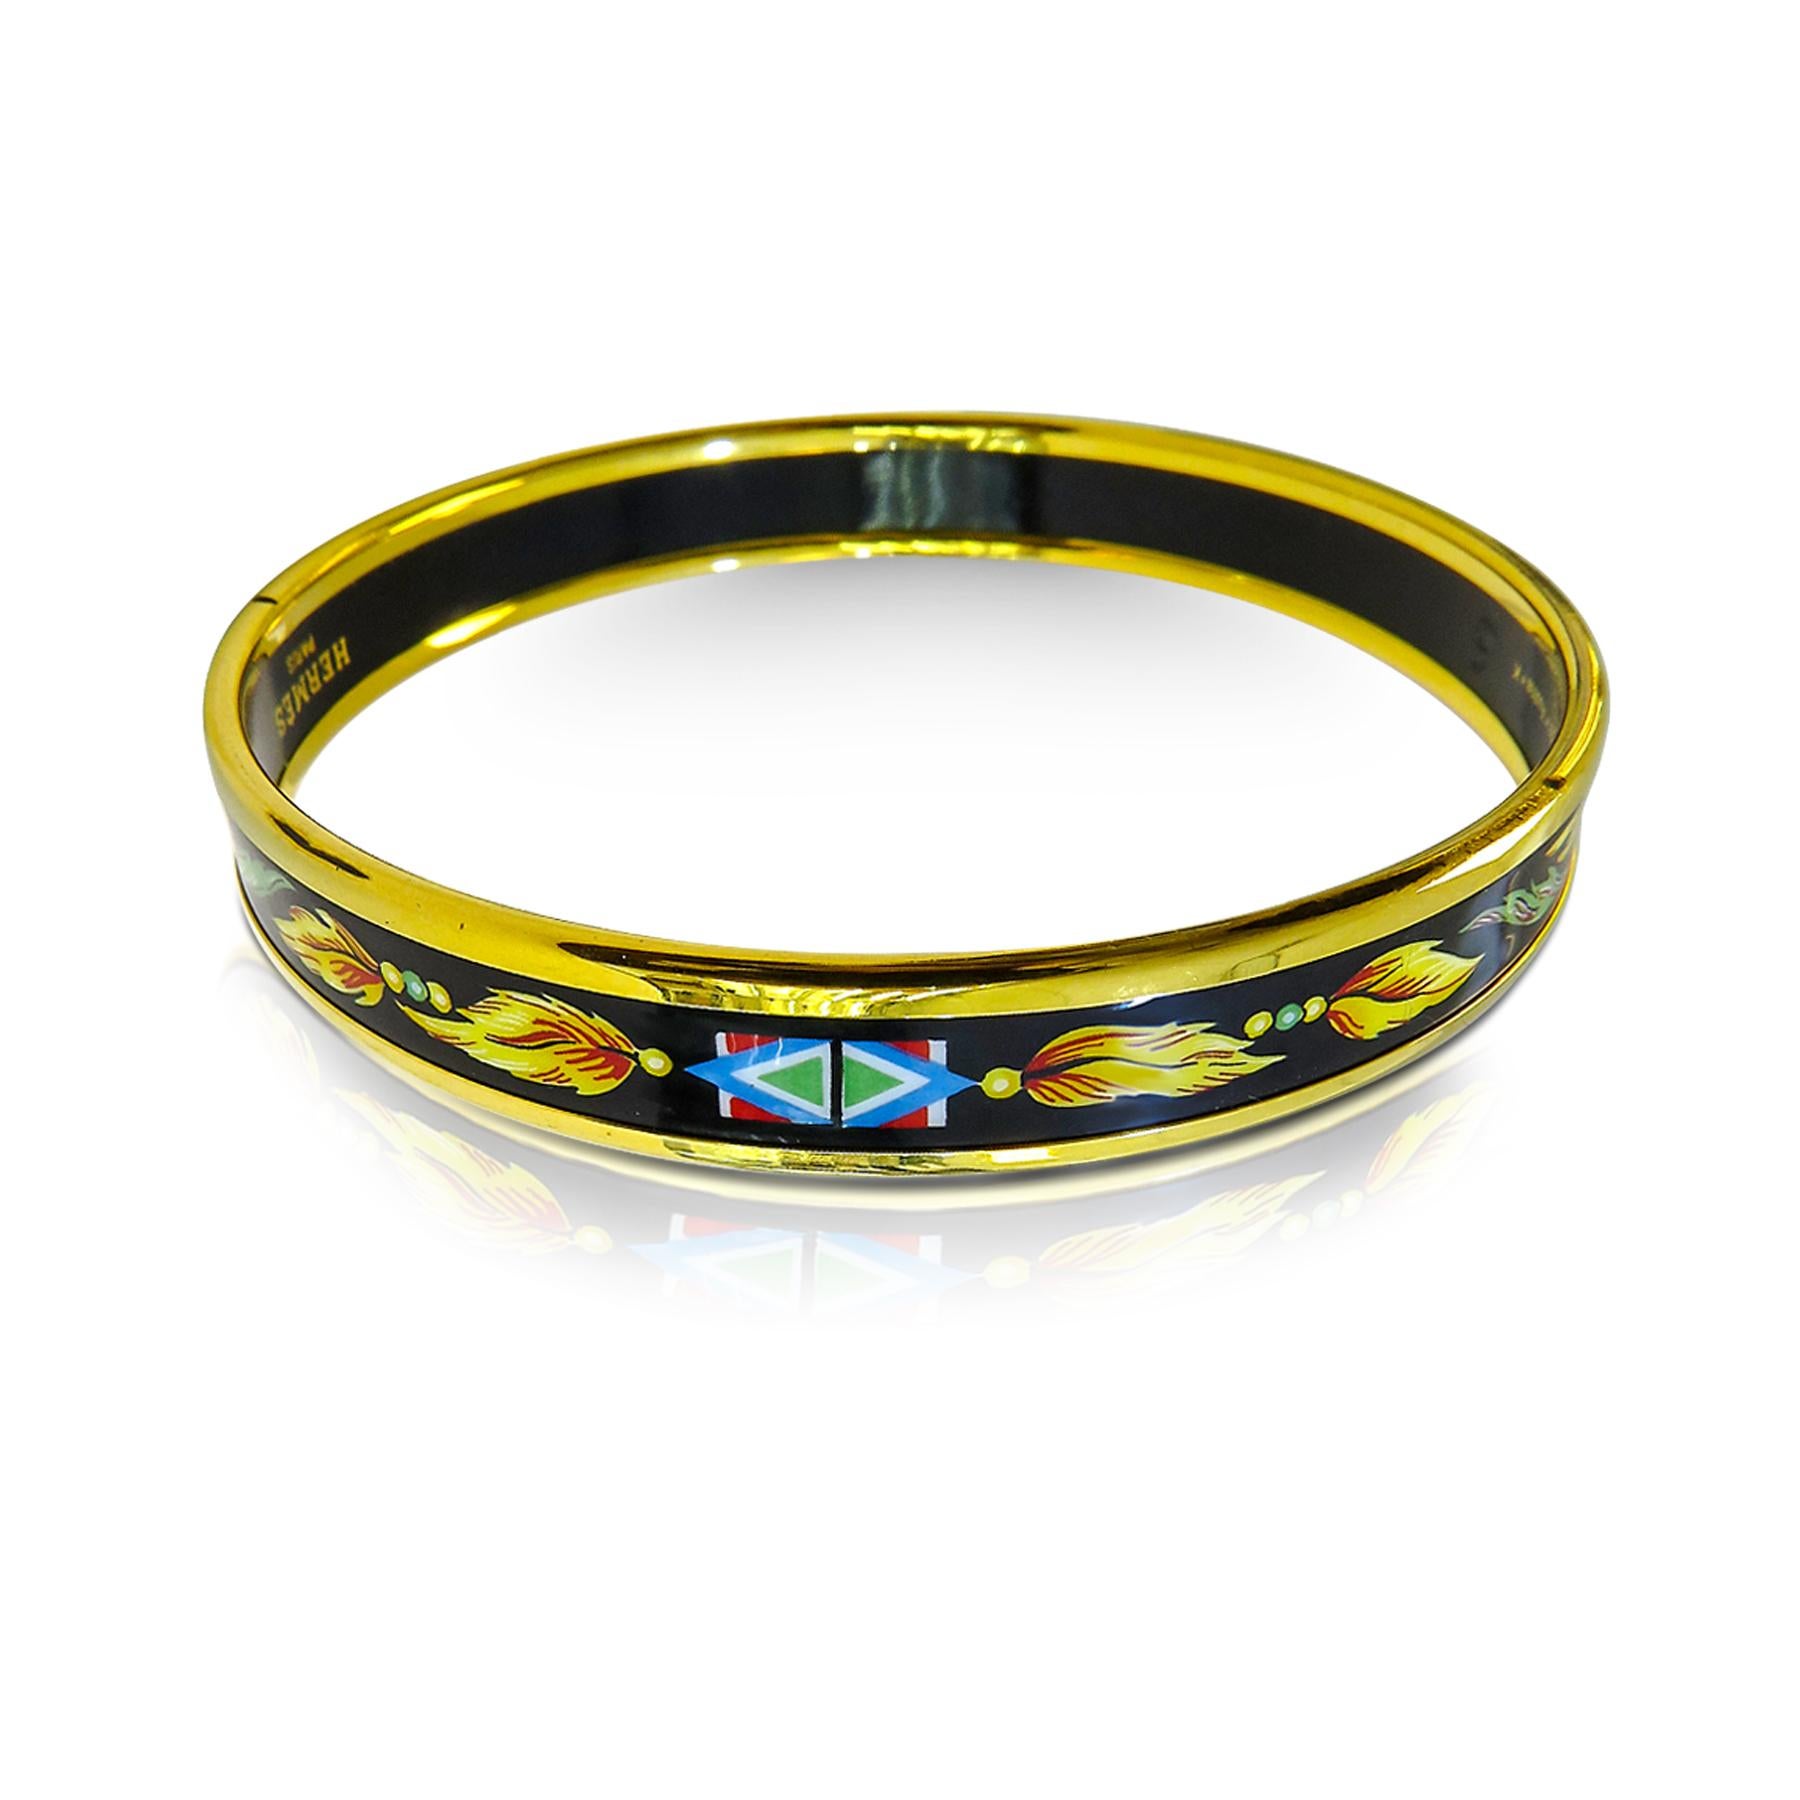 This Hermes bangle features an 18 Karat gold plated with a printed enamel. Carved in Austria, It weighs 48 grams, 10mm wide and has an inner diameter of 2.7 inches to give a comfortable fit in your wrist.
 
Condition: Good, in one side it has